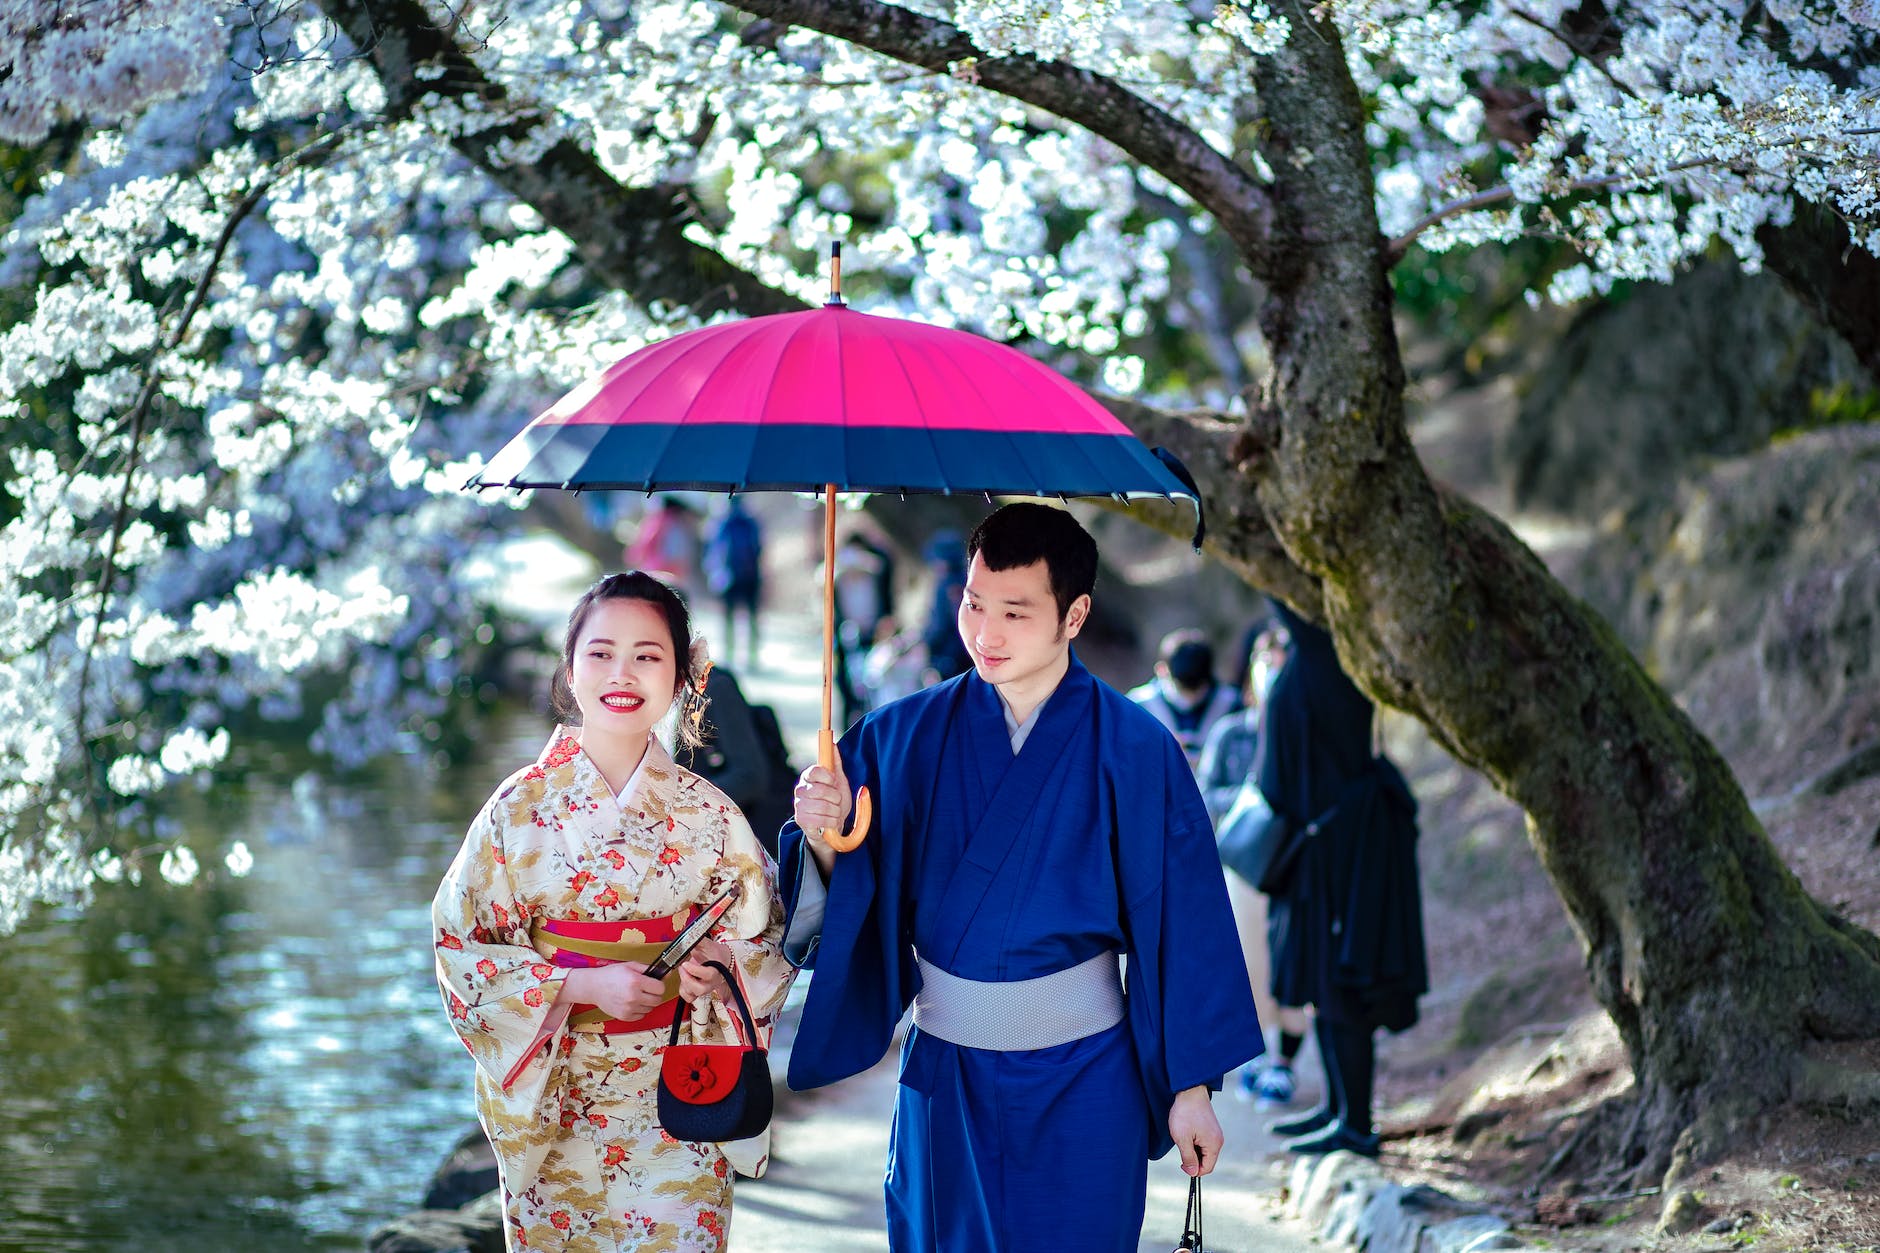 photo of a woman in a floral kimono walking with a man in blue clothes